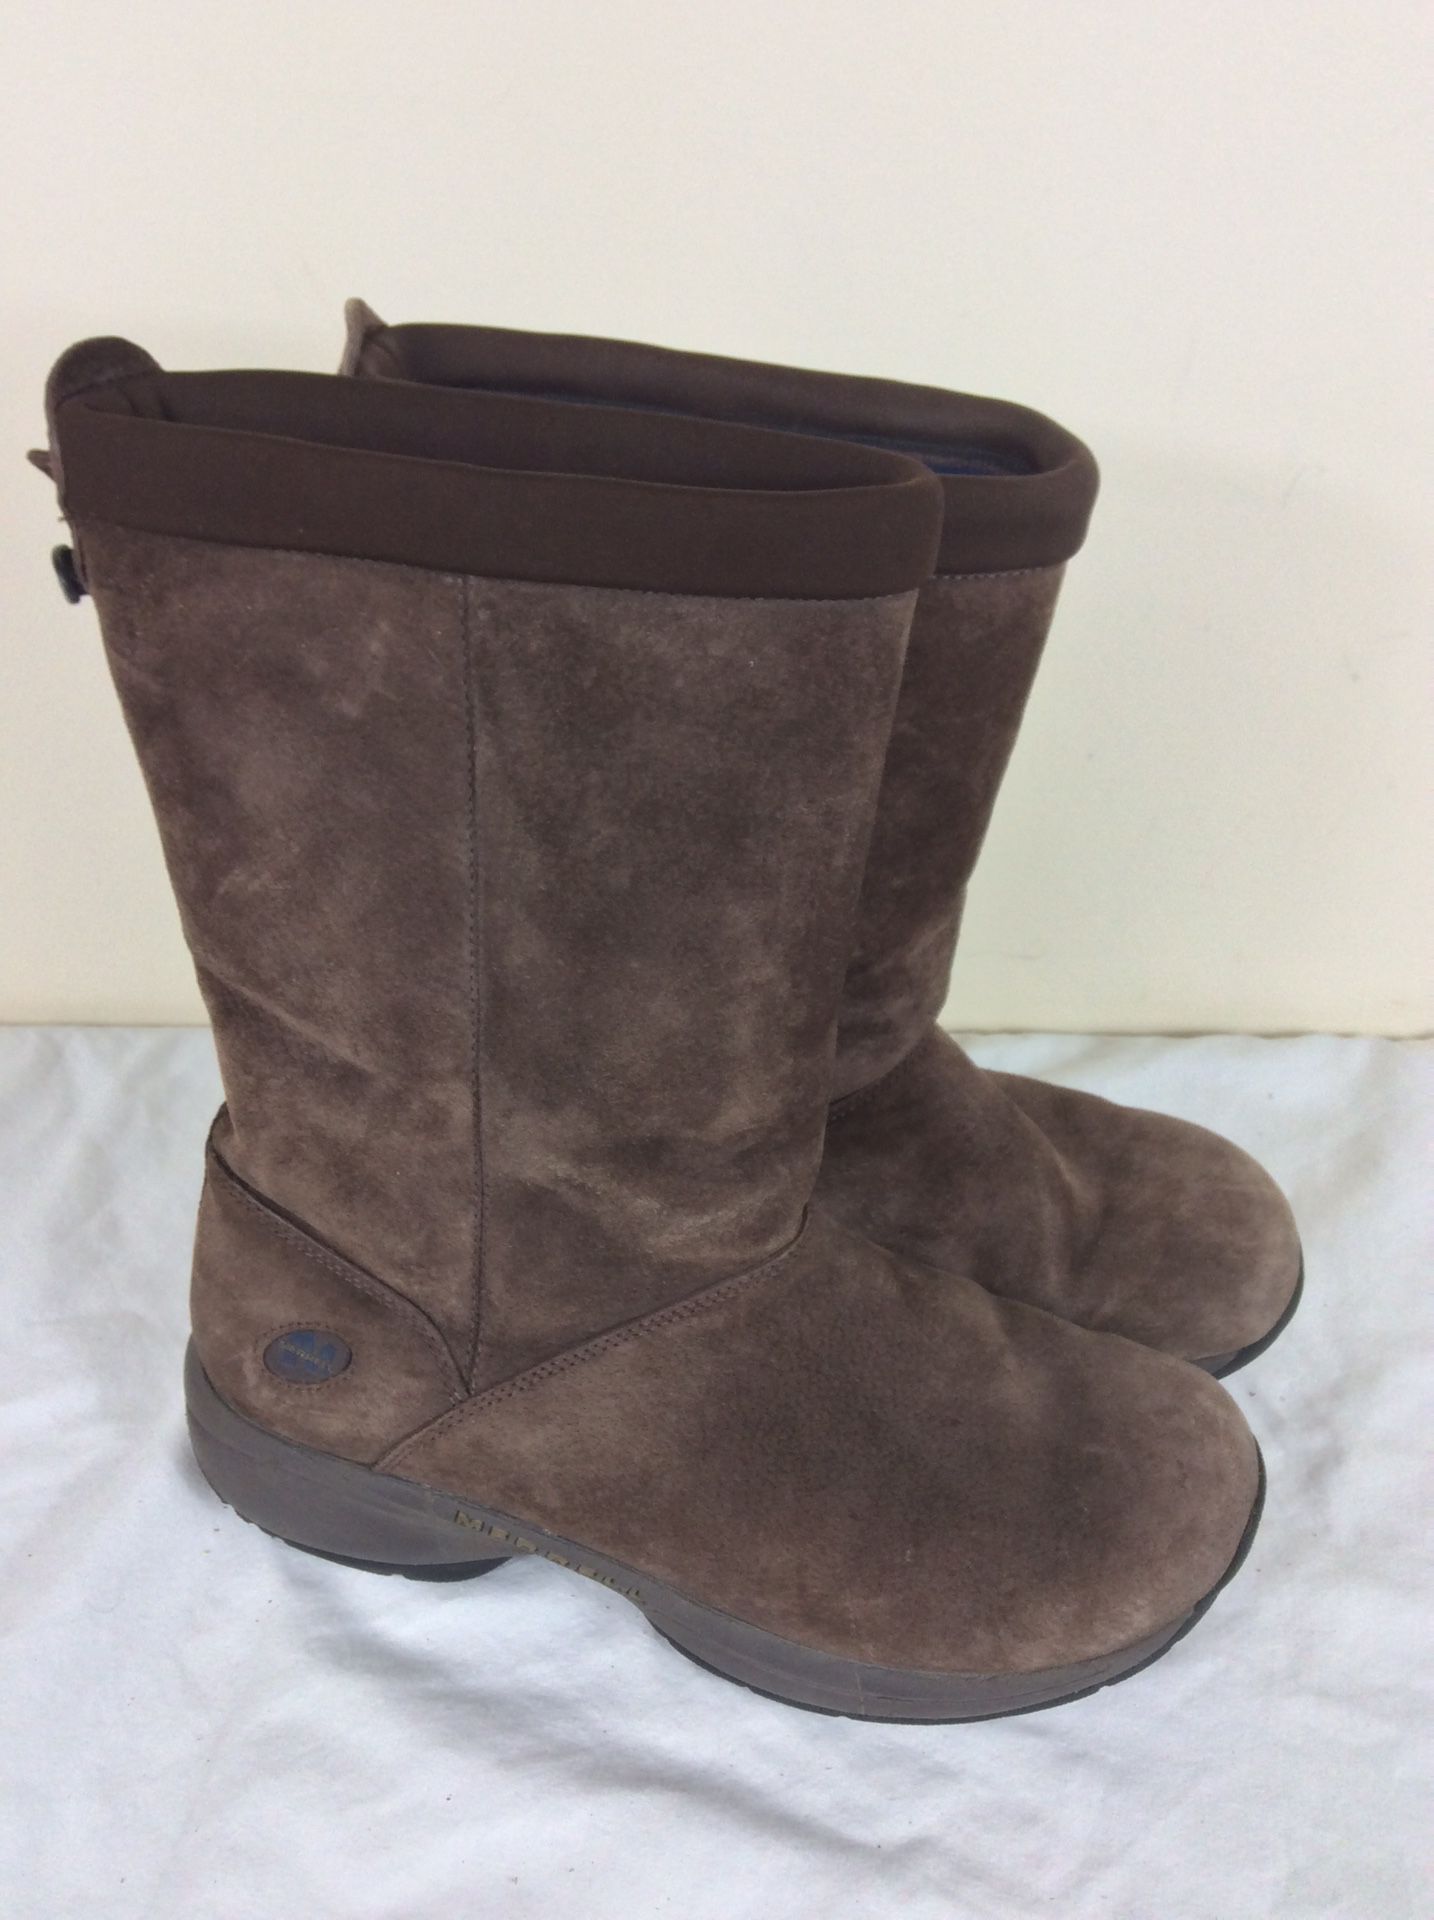 Merrell Boots Womens Size 9 Brown Primo Chill Massif Chocolate Suede Fleece Lined